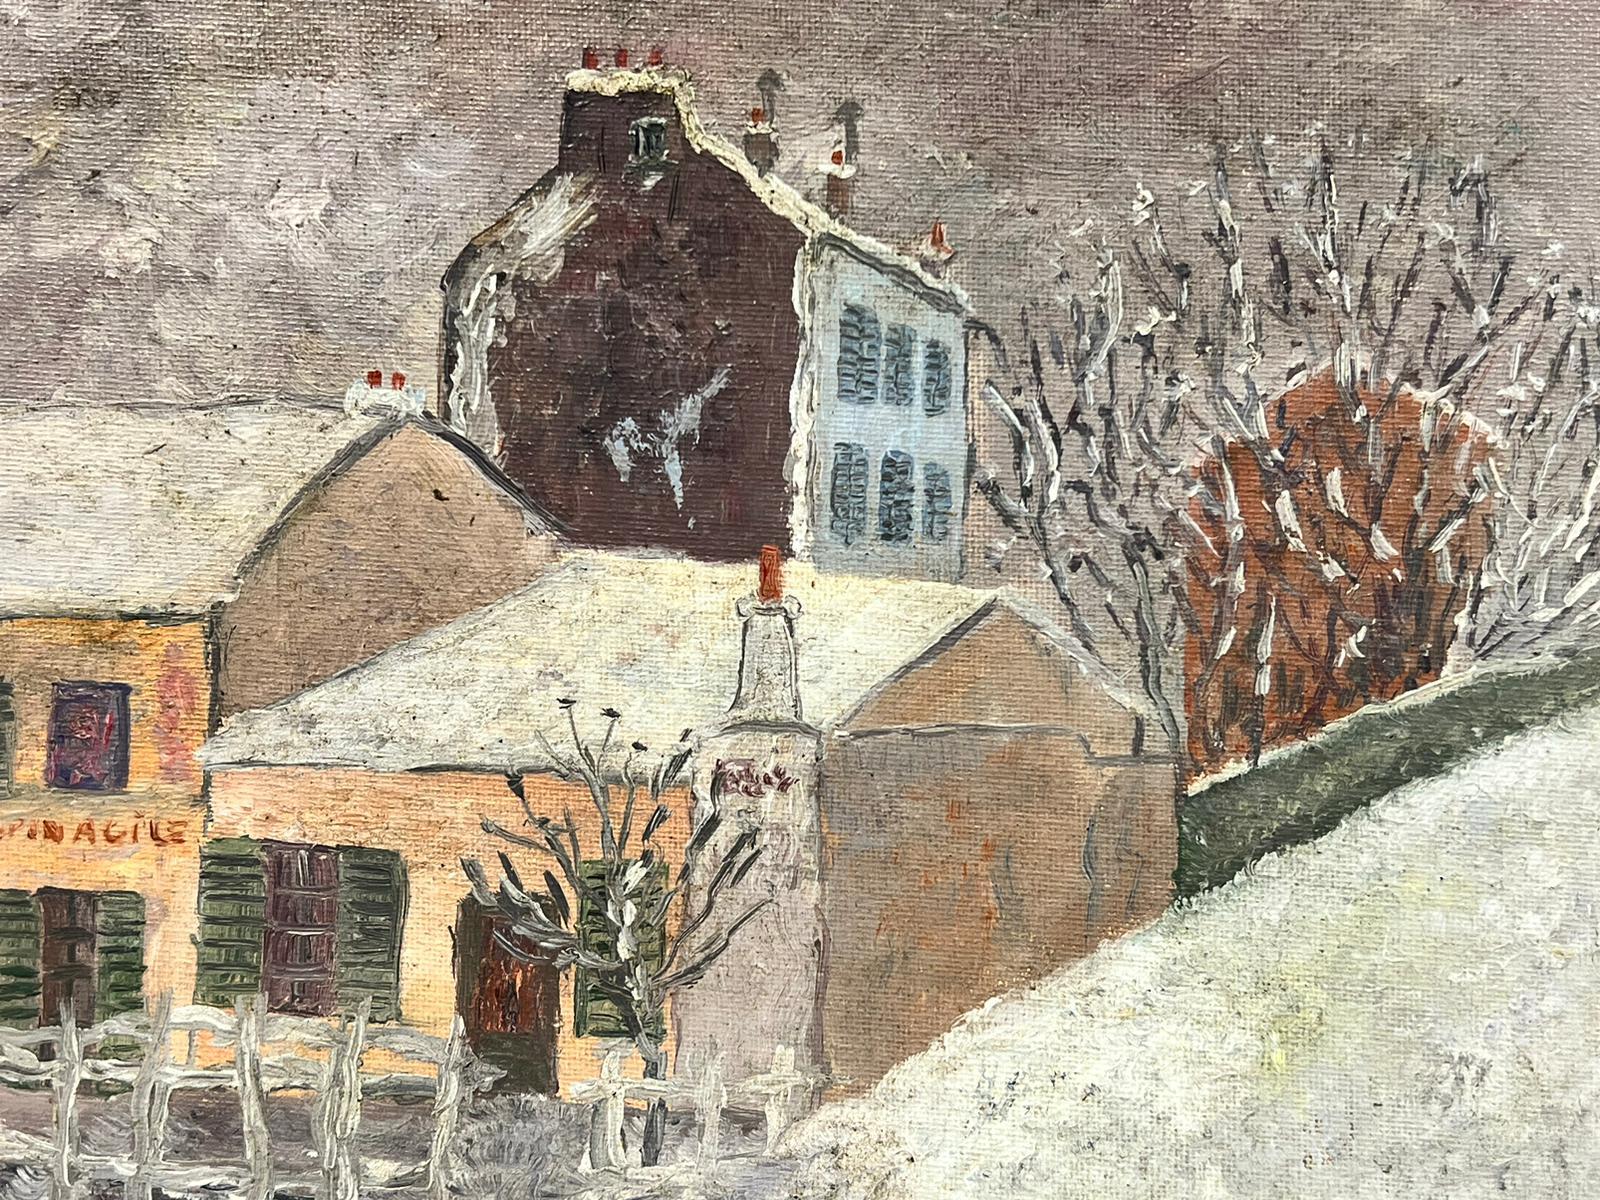 Montmartre Paris in Snow Latin Agile Street Scene Signed French Oil 20thC - Impressionist Painting by French School